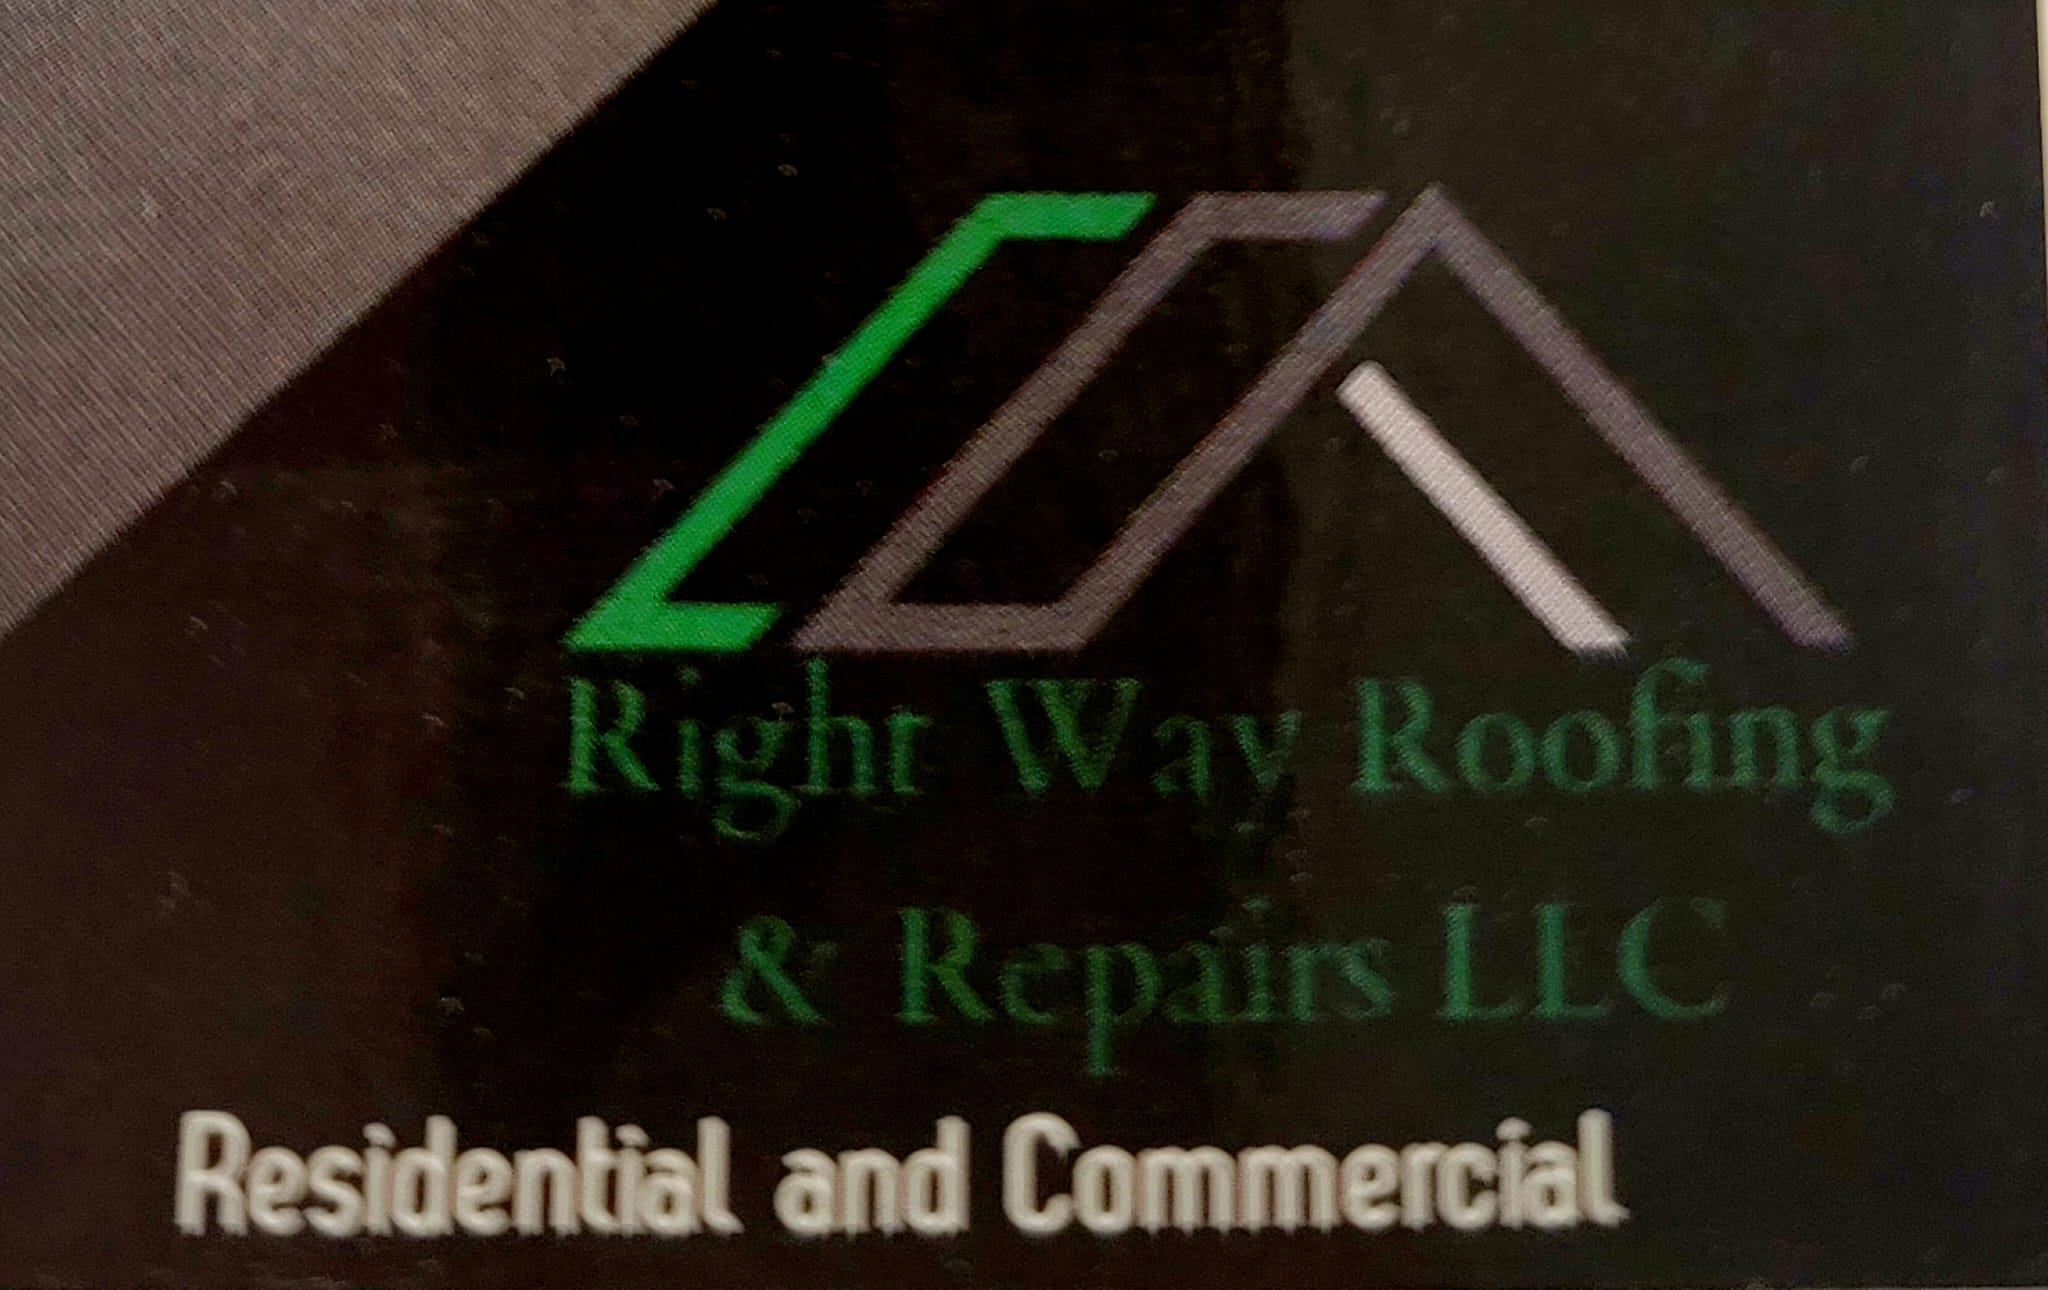 Right Way Roofing and Repairs, LLC Logo